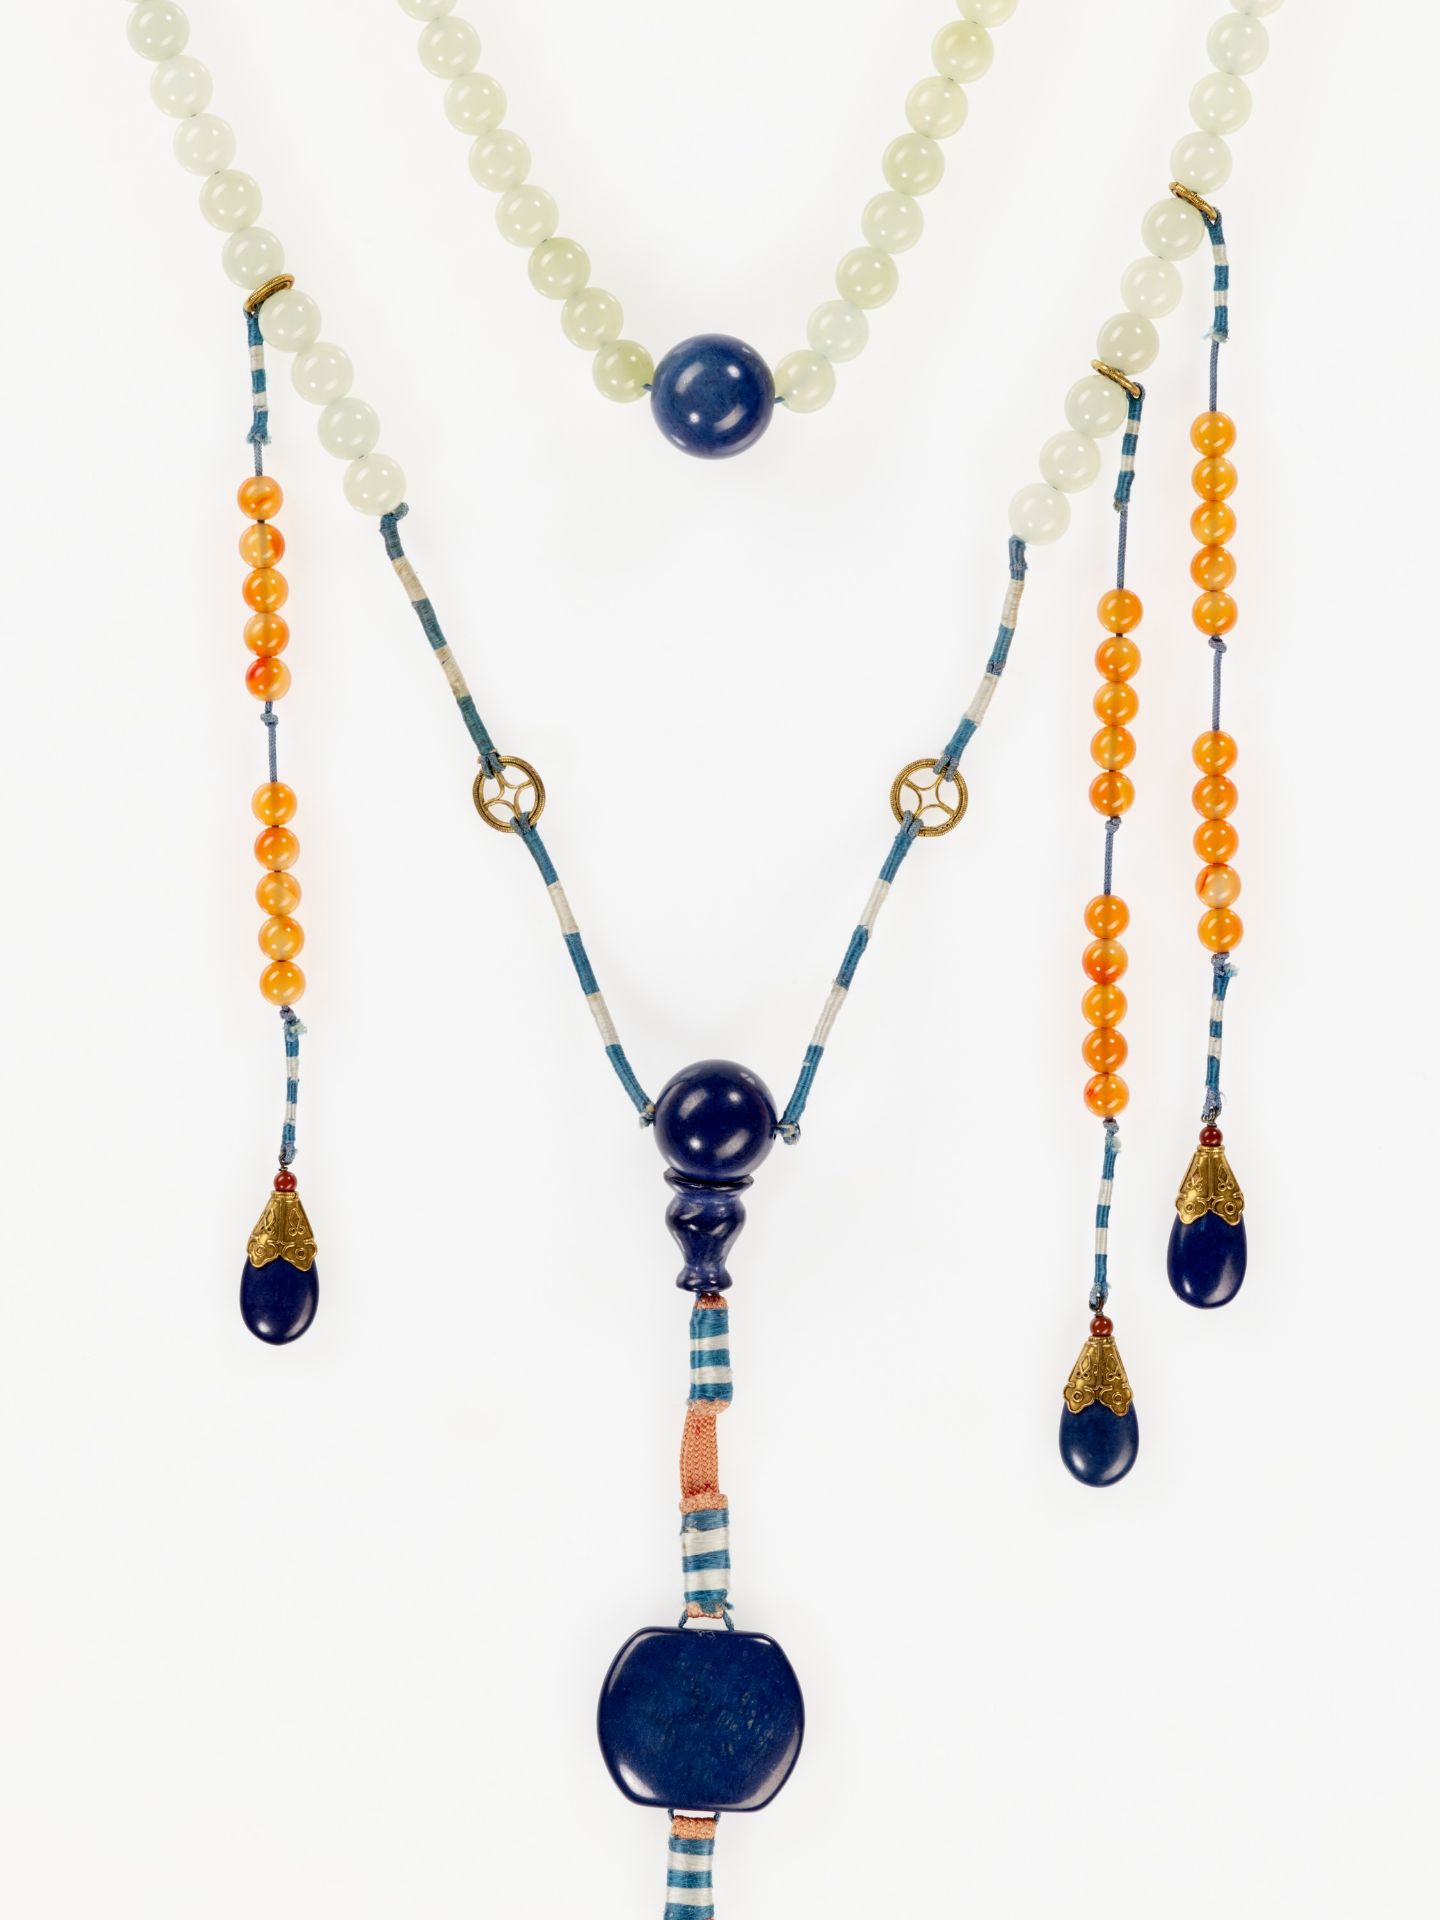 A LAPIS LAZULI COURT NECKLACE, CHAOZHU, QING DYNASTY - Image 3 of 7